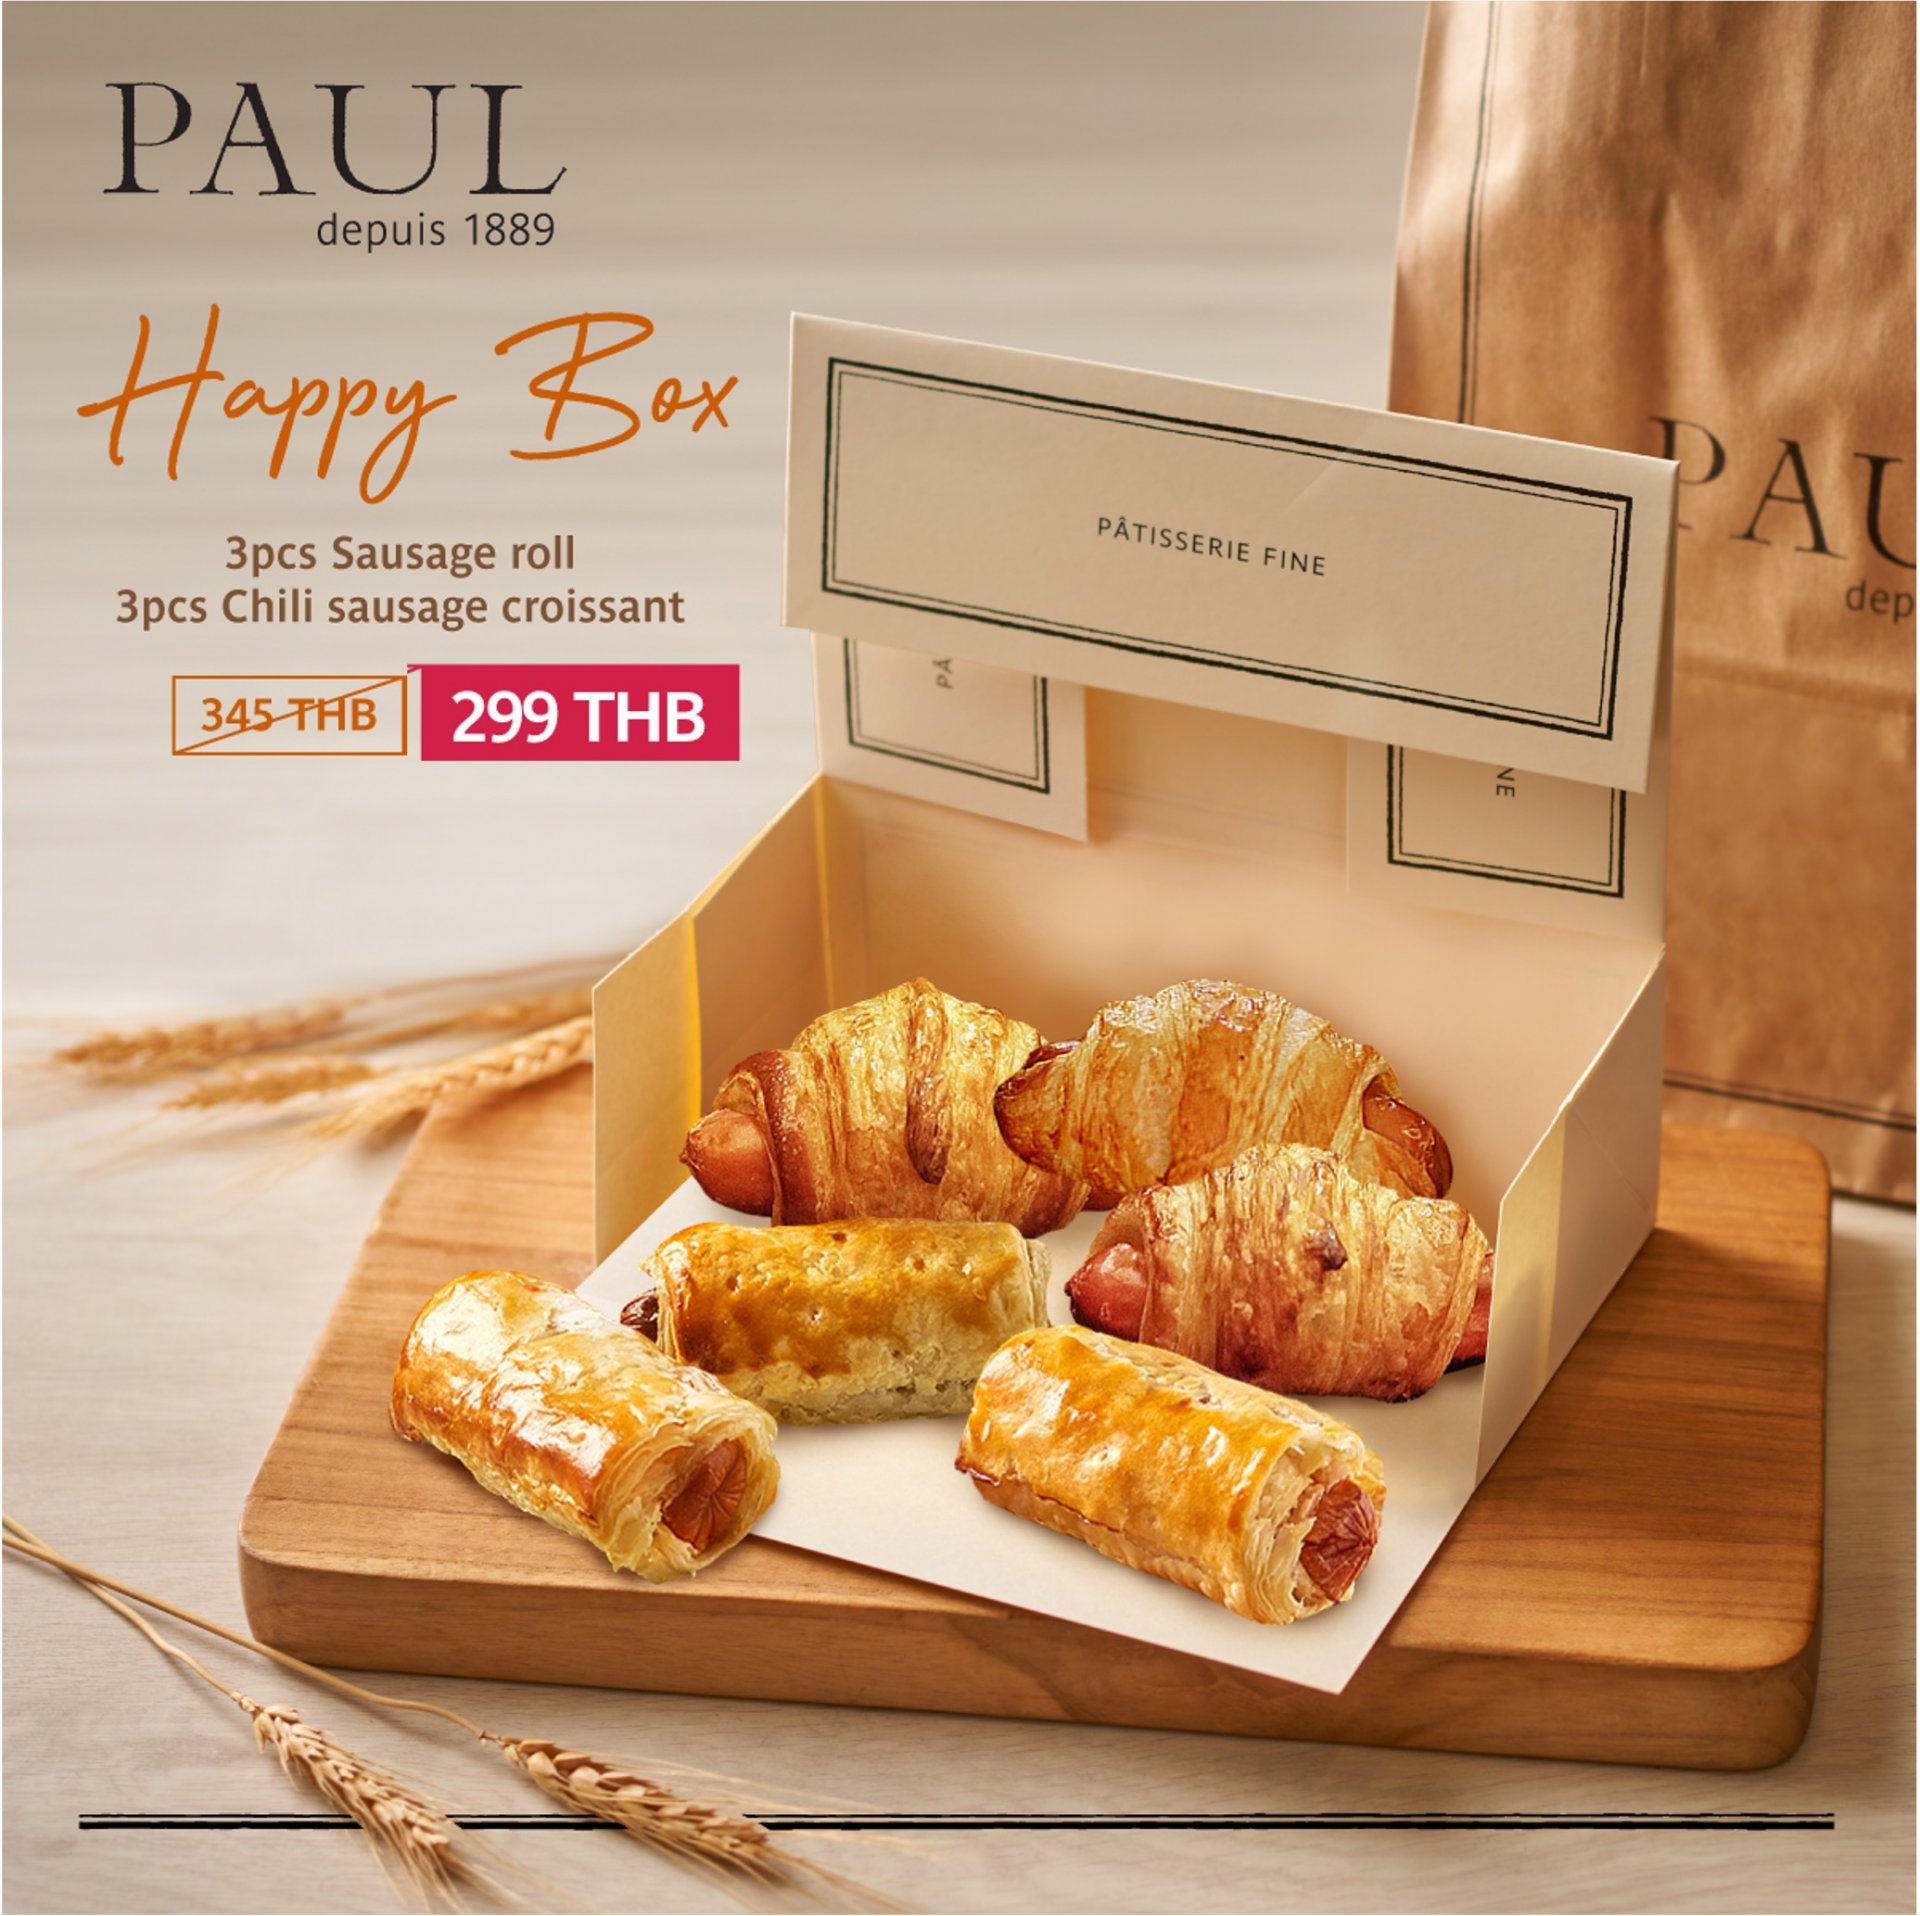 Happy Box-3 Sausage Roll and 3 Chili Sausage Croissant